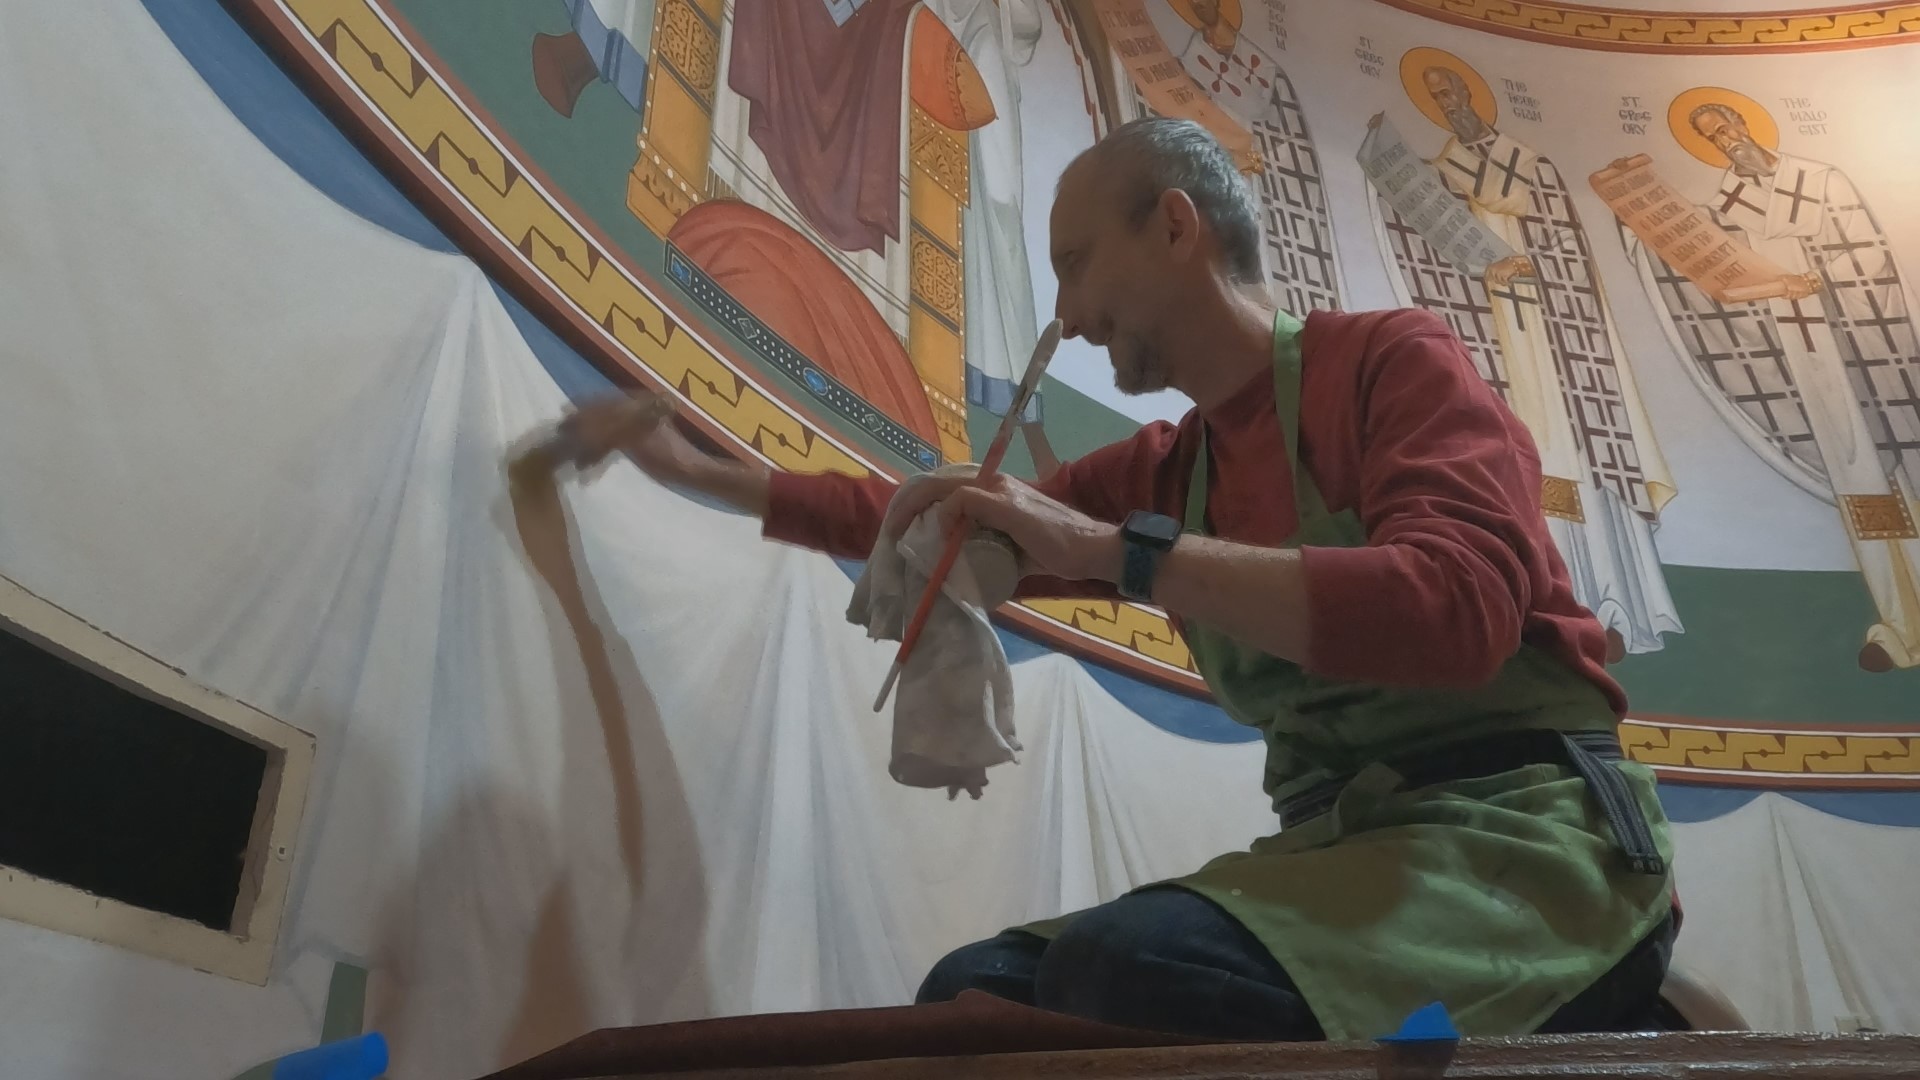 St. Innocent Orthodox Christian Church is adding some color to its ceilings which is said to "draw in" the congregation to the teachings of the gospel.